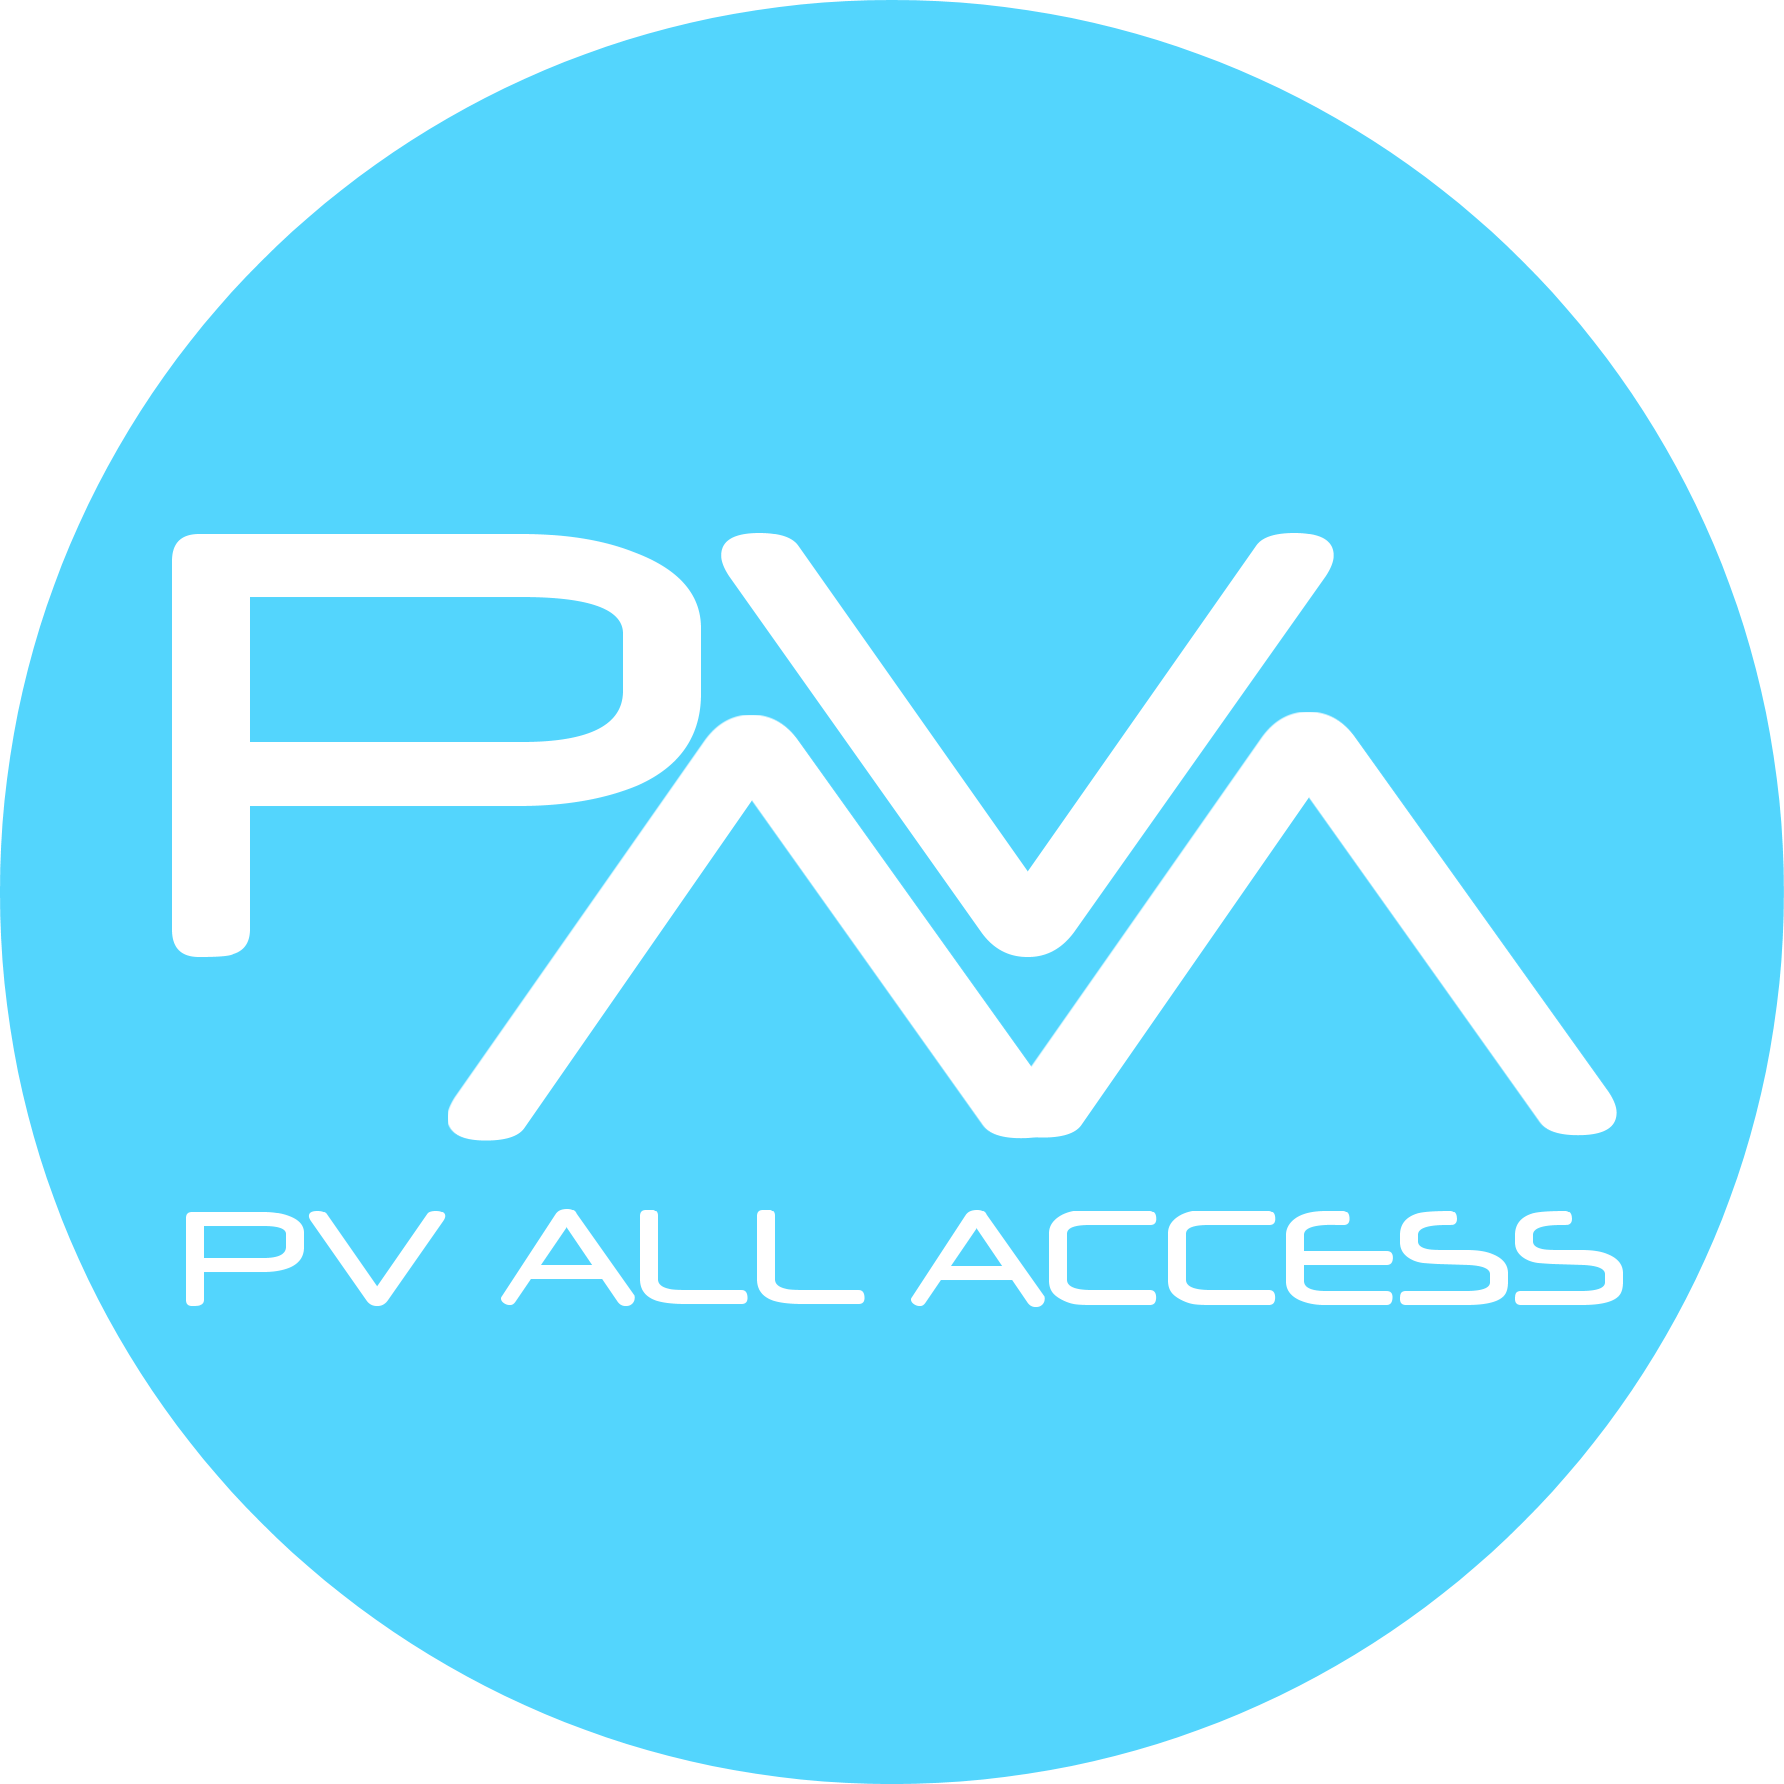 PV ALL ACCESS